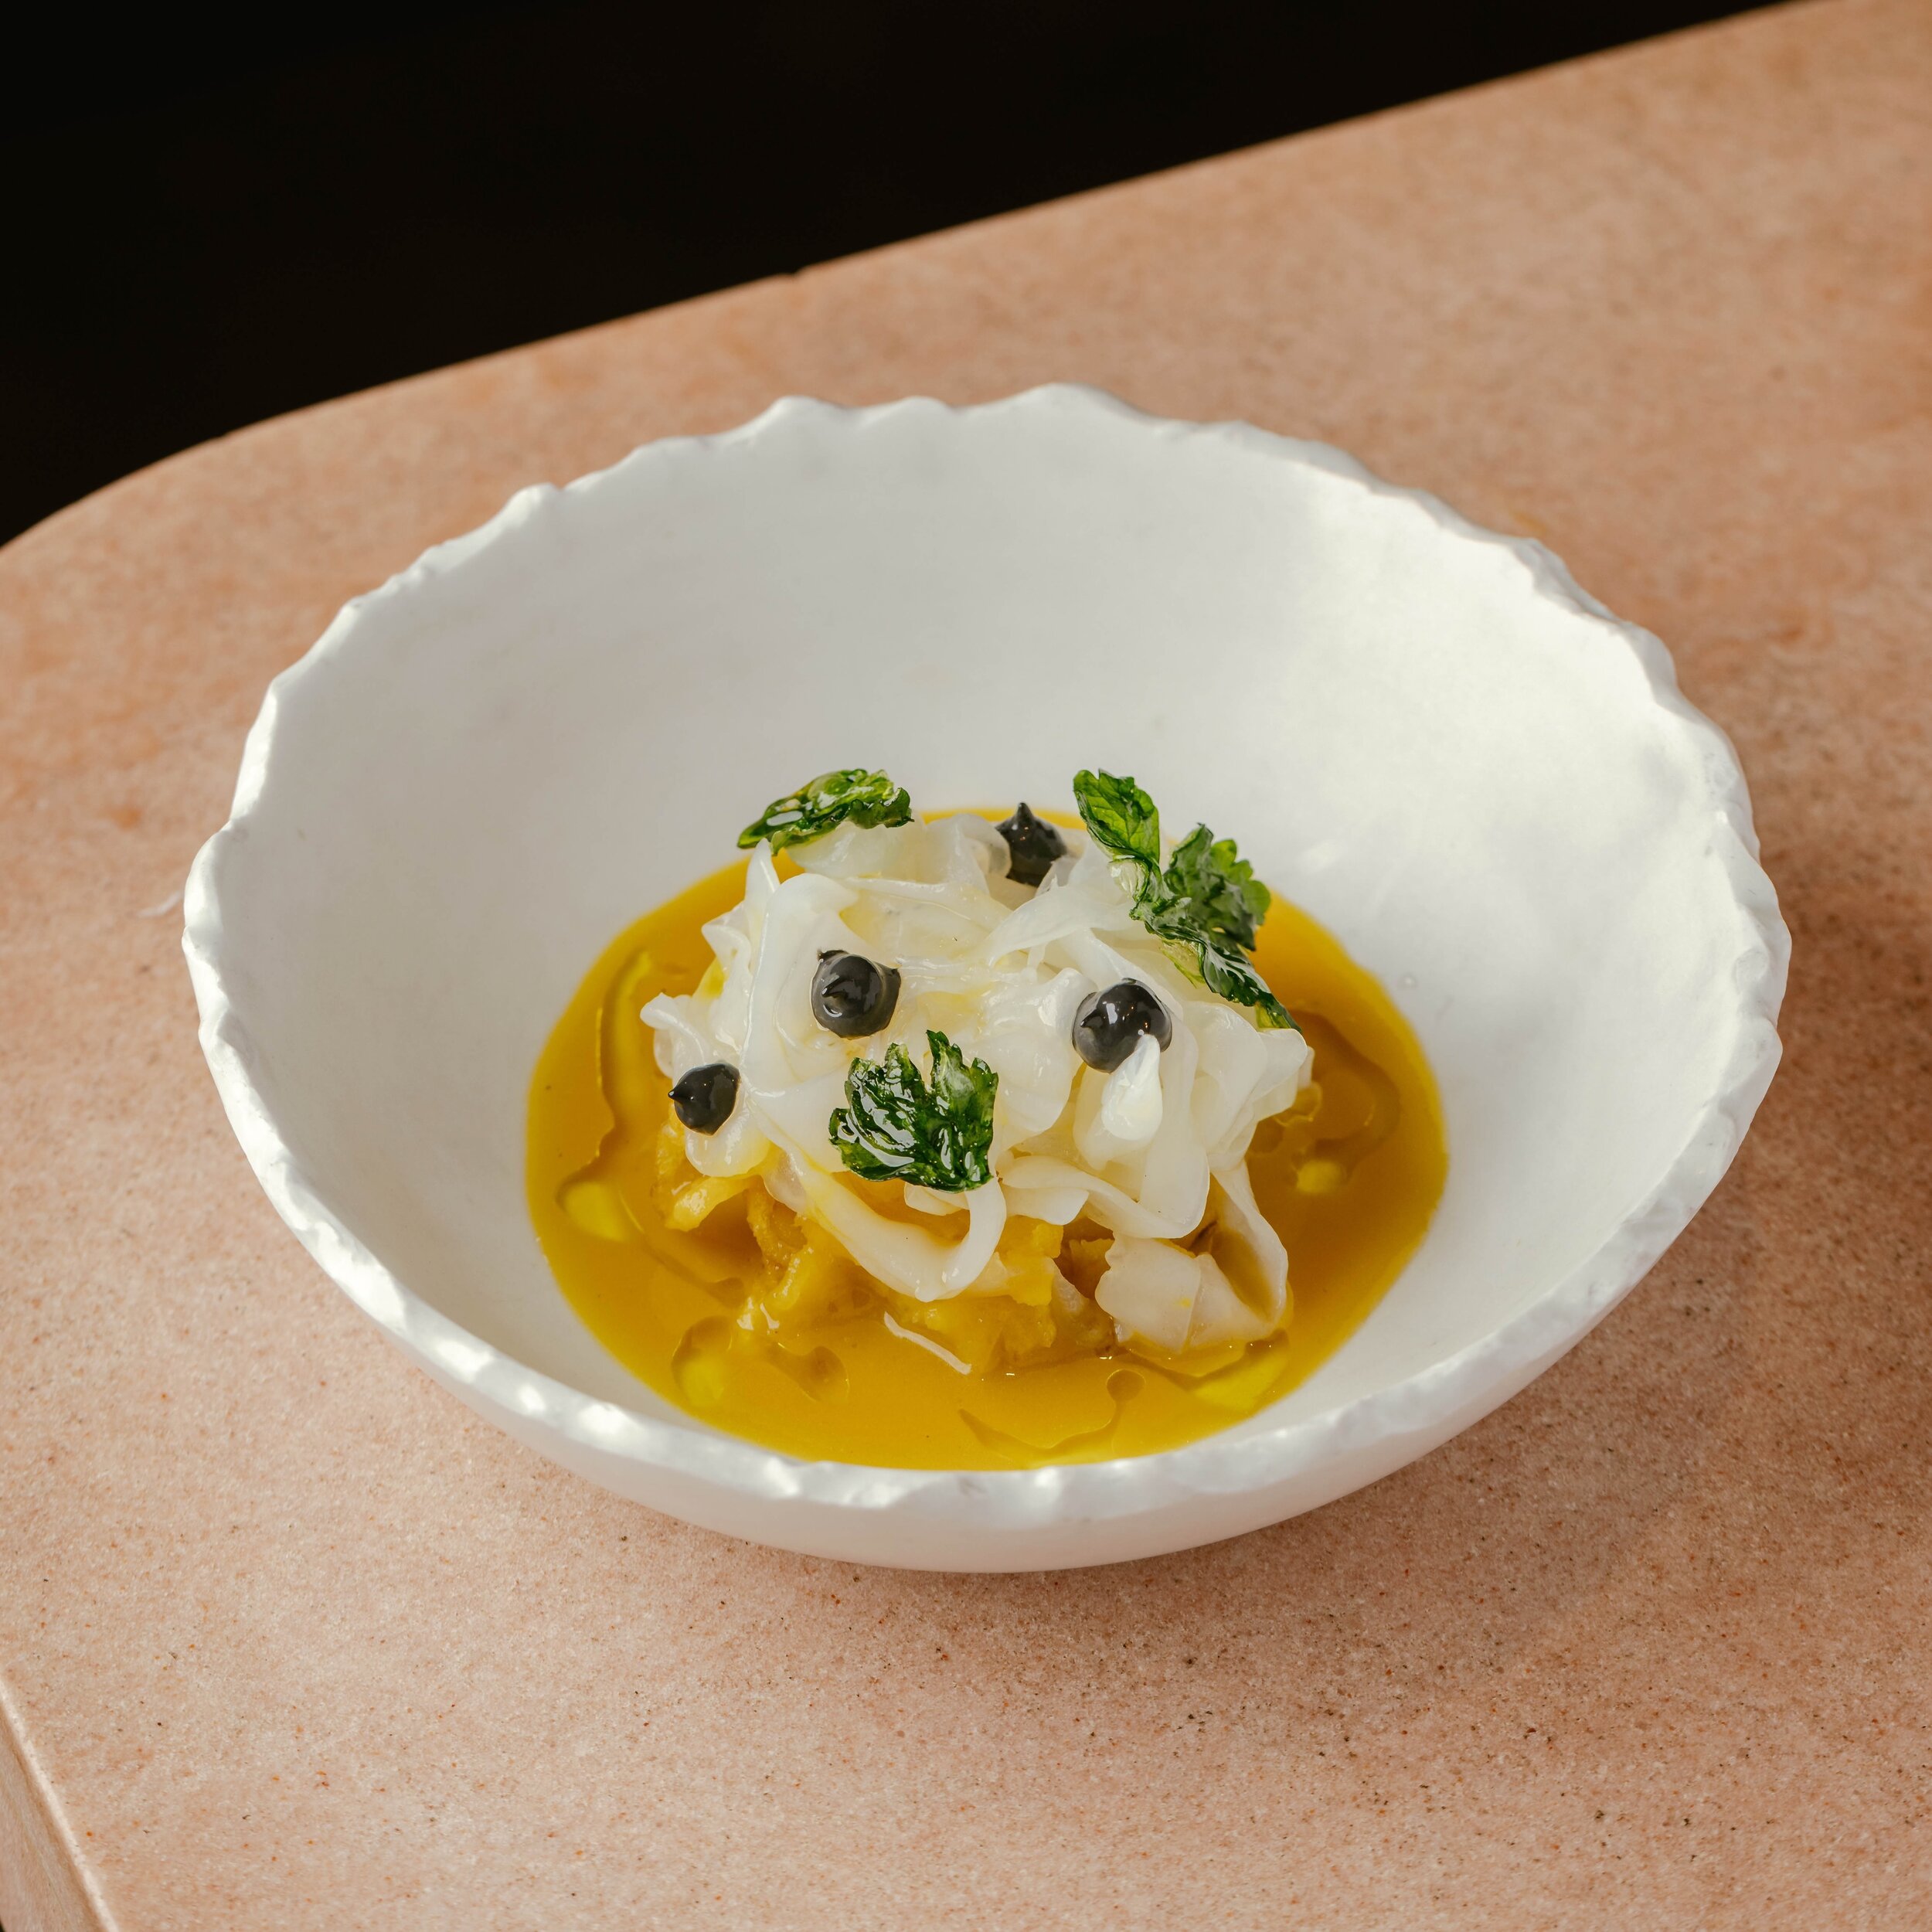 Prepare to be blown away by the incredible flavours of our Papas con Choco! This delight takes the traditional stew of cuttlefish and potato from the sunny south of Spain and elevates it to a whole new level. Picture tender confit cuttlefish tallarin